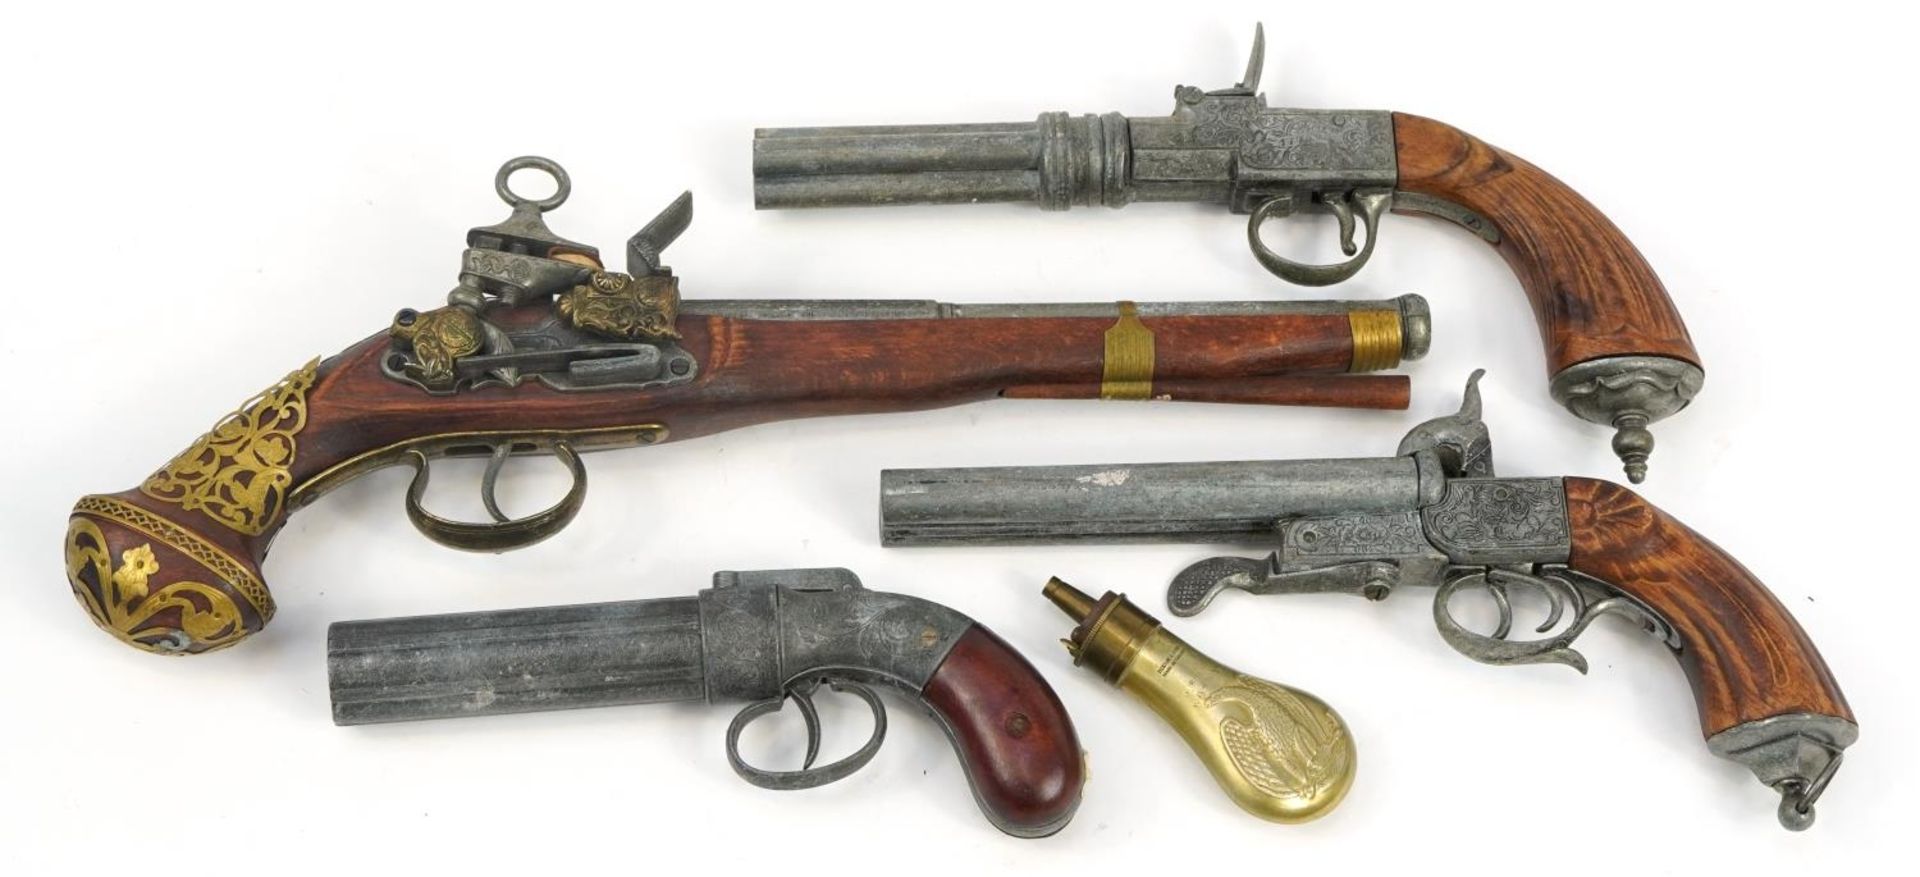 Four decorative flintlock and percussion pistols and a powder flask, the largest 42cm in length